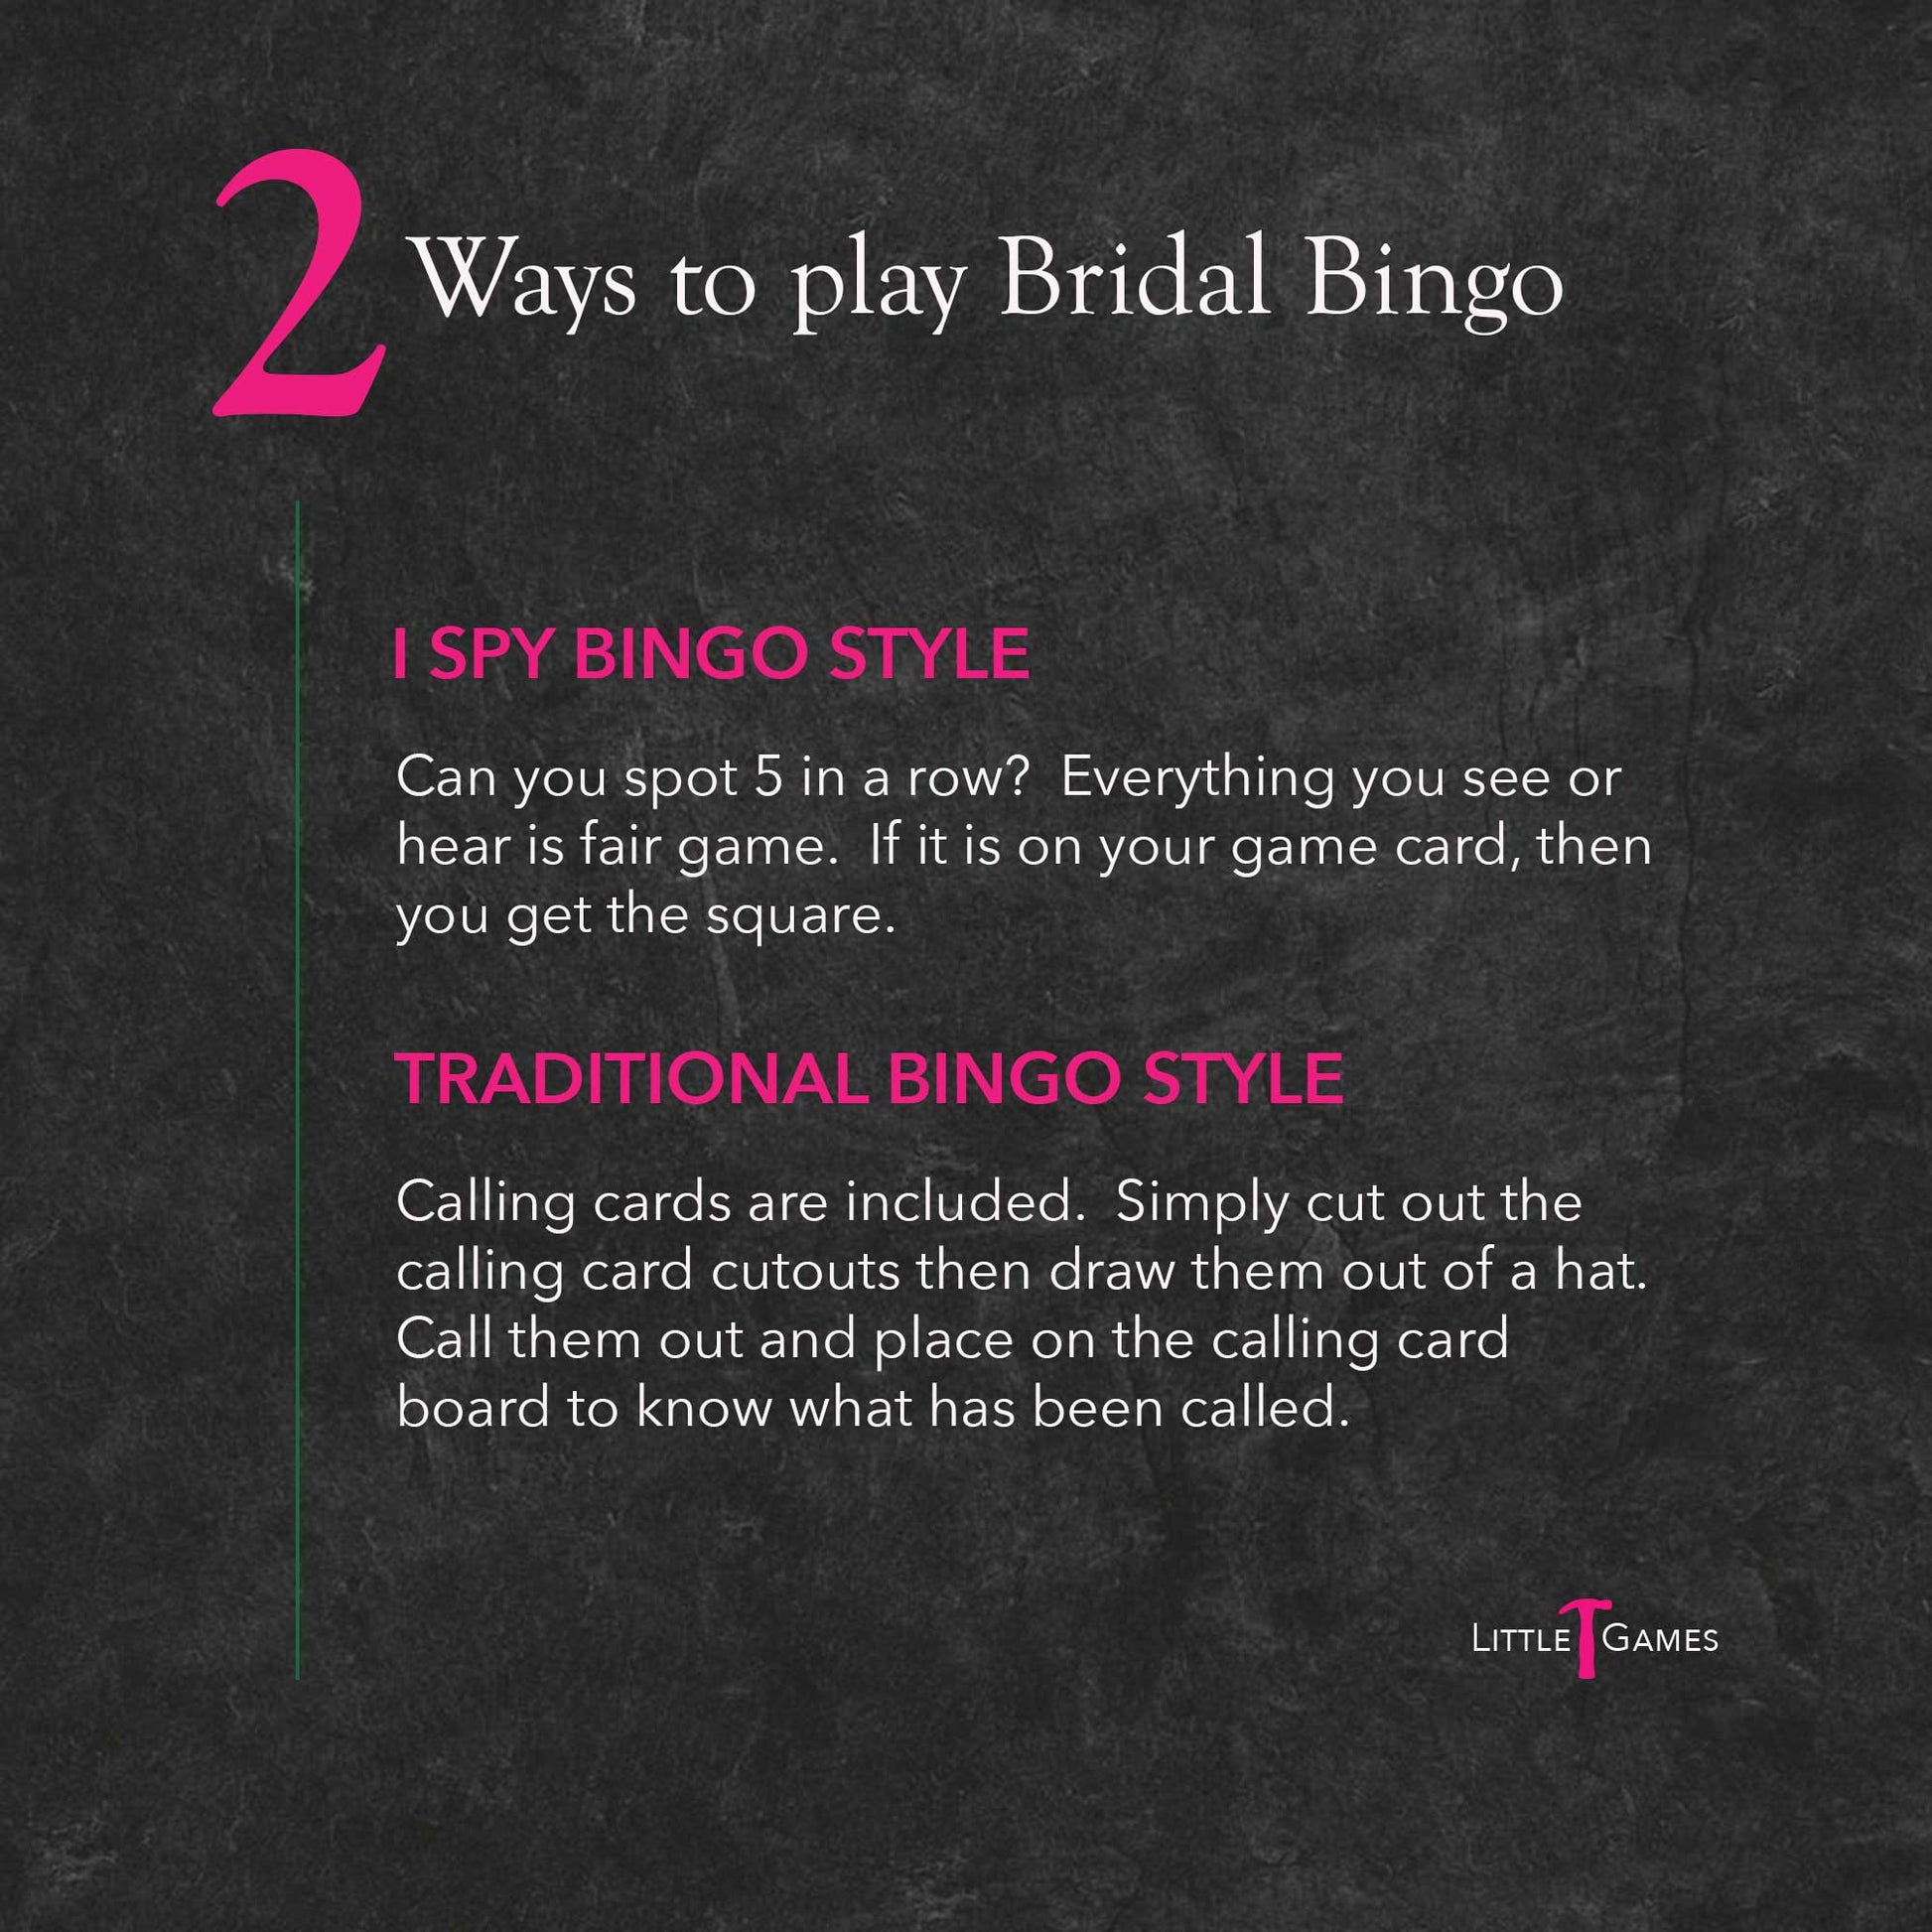 Pink and white text on a slate background explaining the 2 ways to play Bridal Bingo as either I Spy or Traditional style